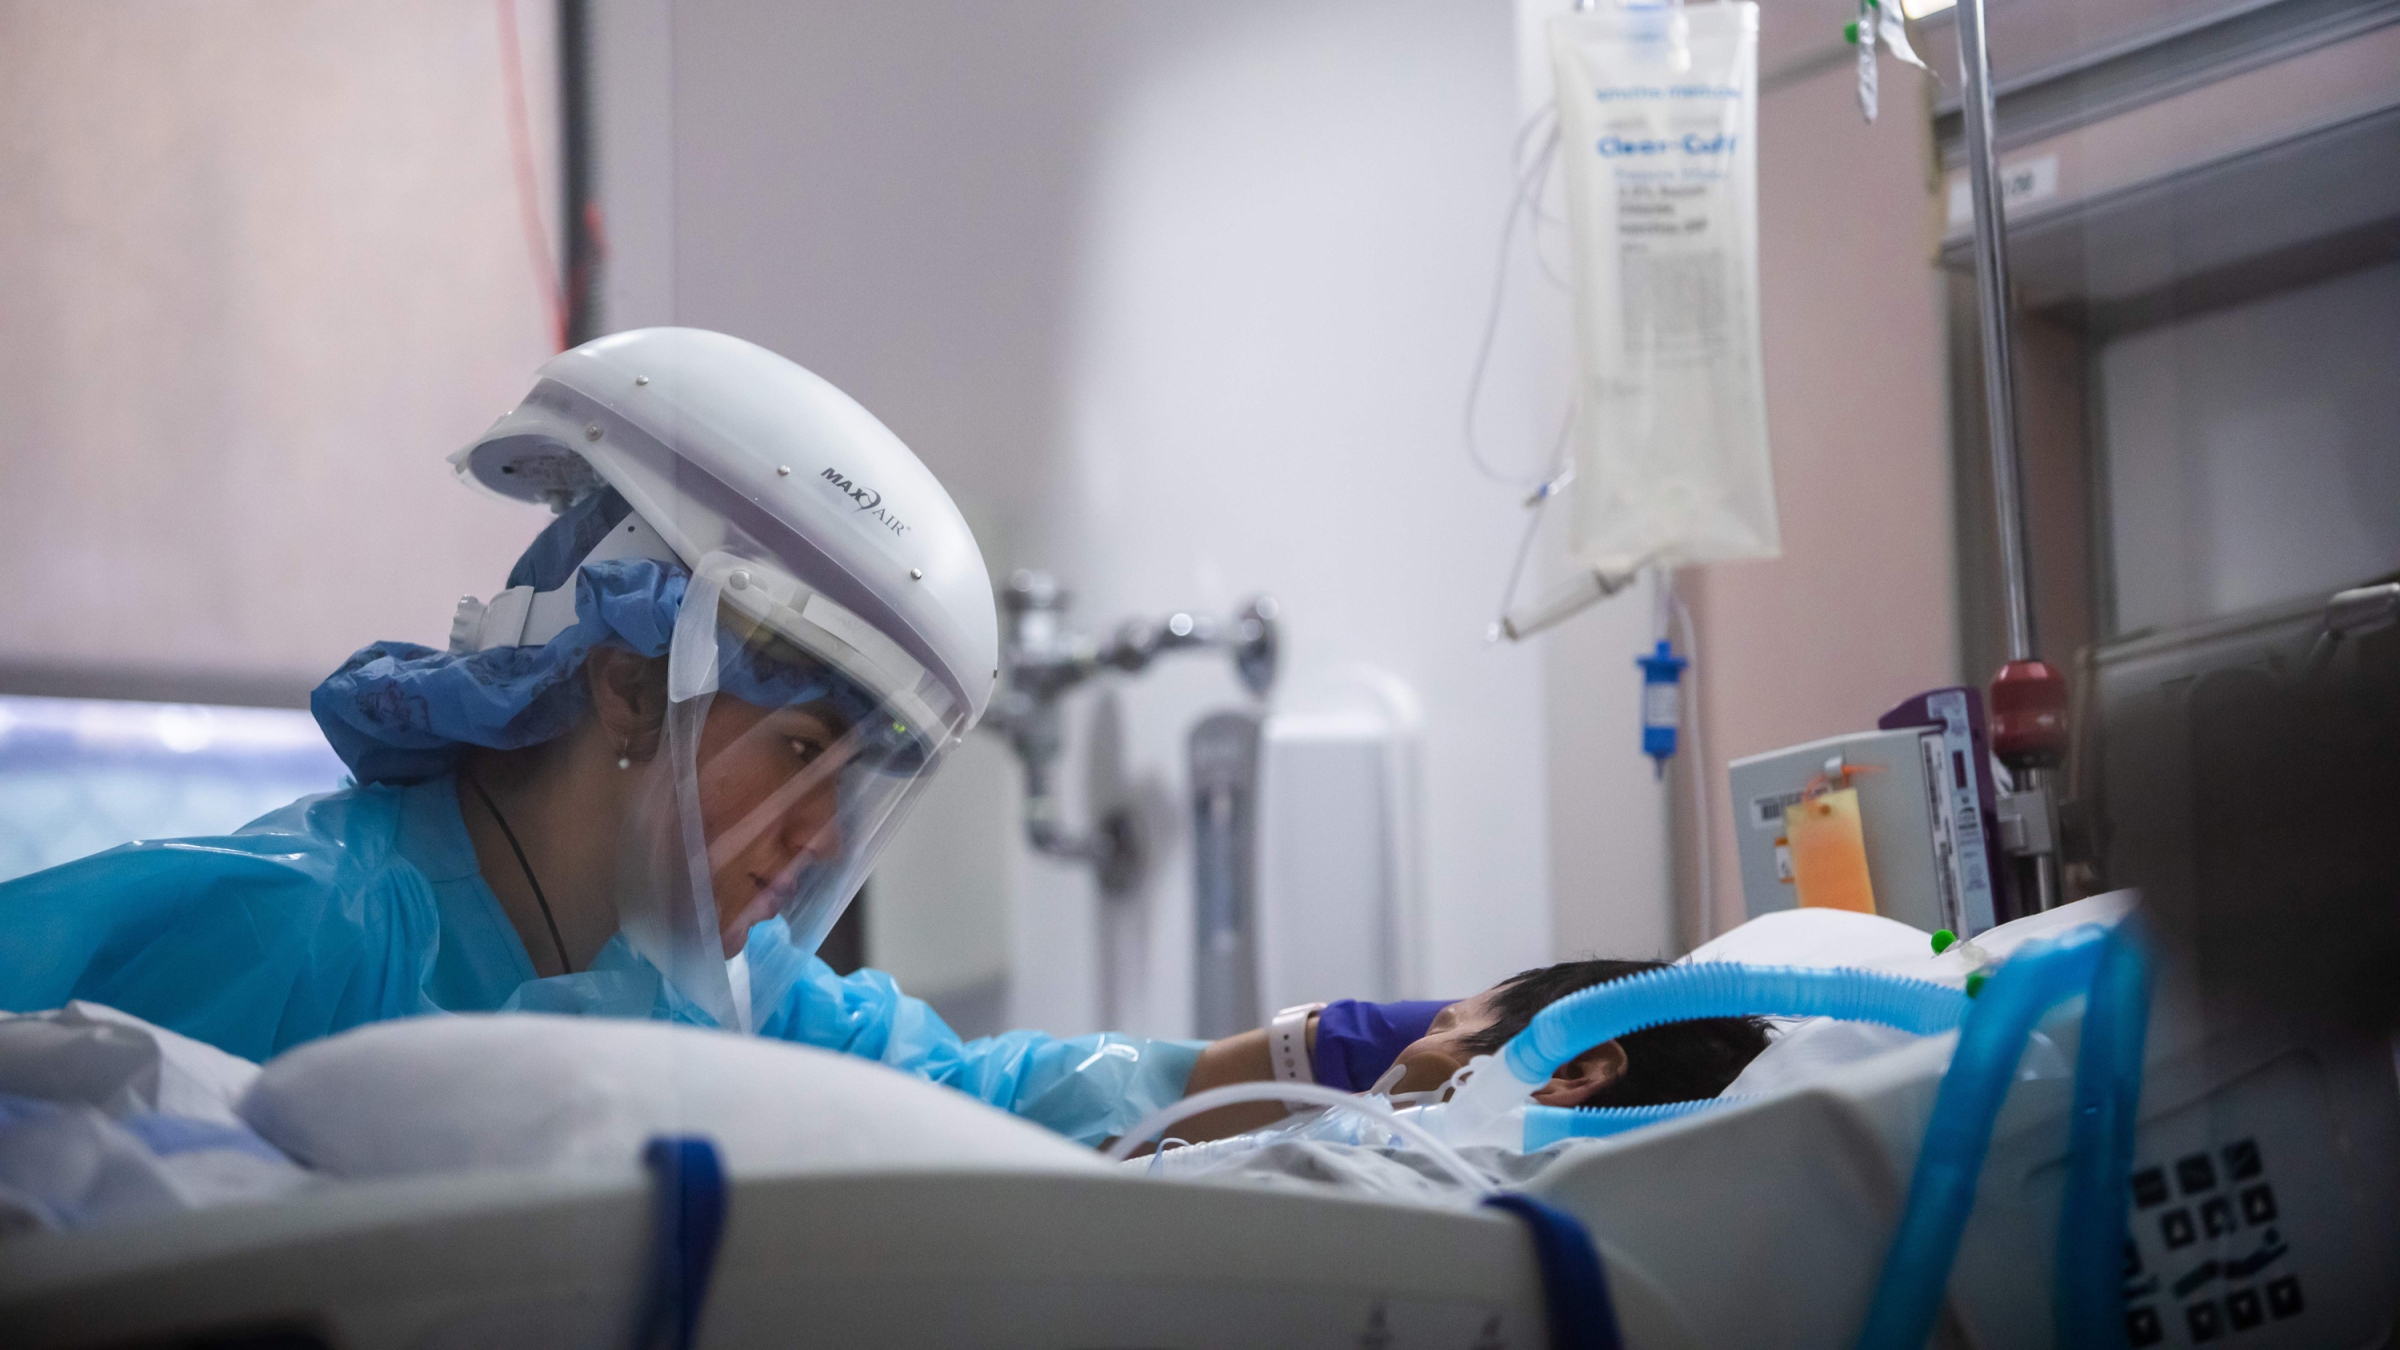 Registered nurse Yeni Sandoval wears personal protective equipment while she cares for a COVID-19 patient in the Intensive Care Unit at Providence Cedars-Sinai Tarzana Medical Center in Tarzana, California, on January 3, 2021.